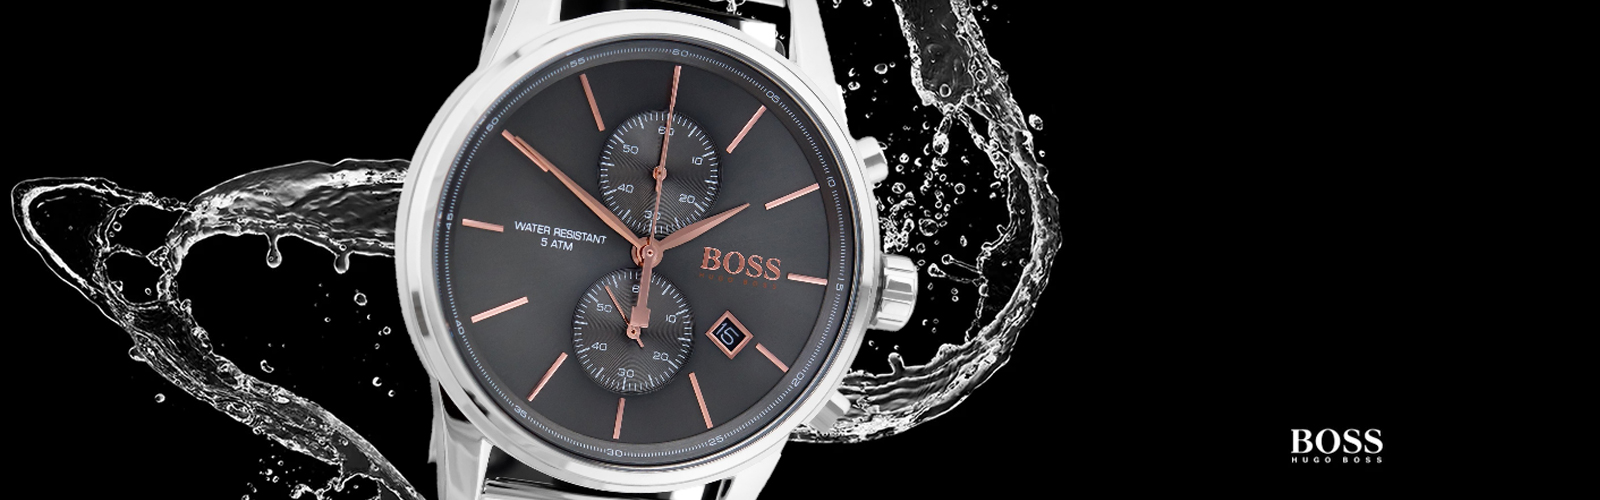 hugo boss watches outlet